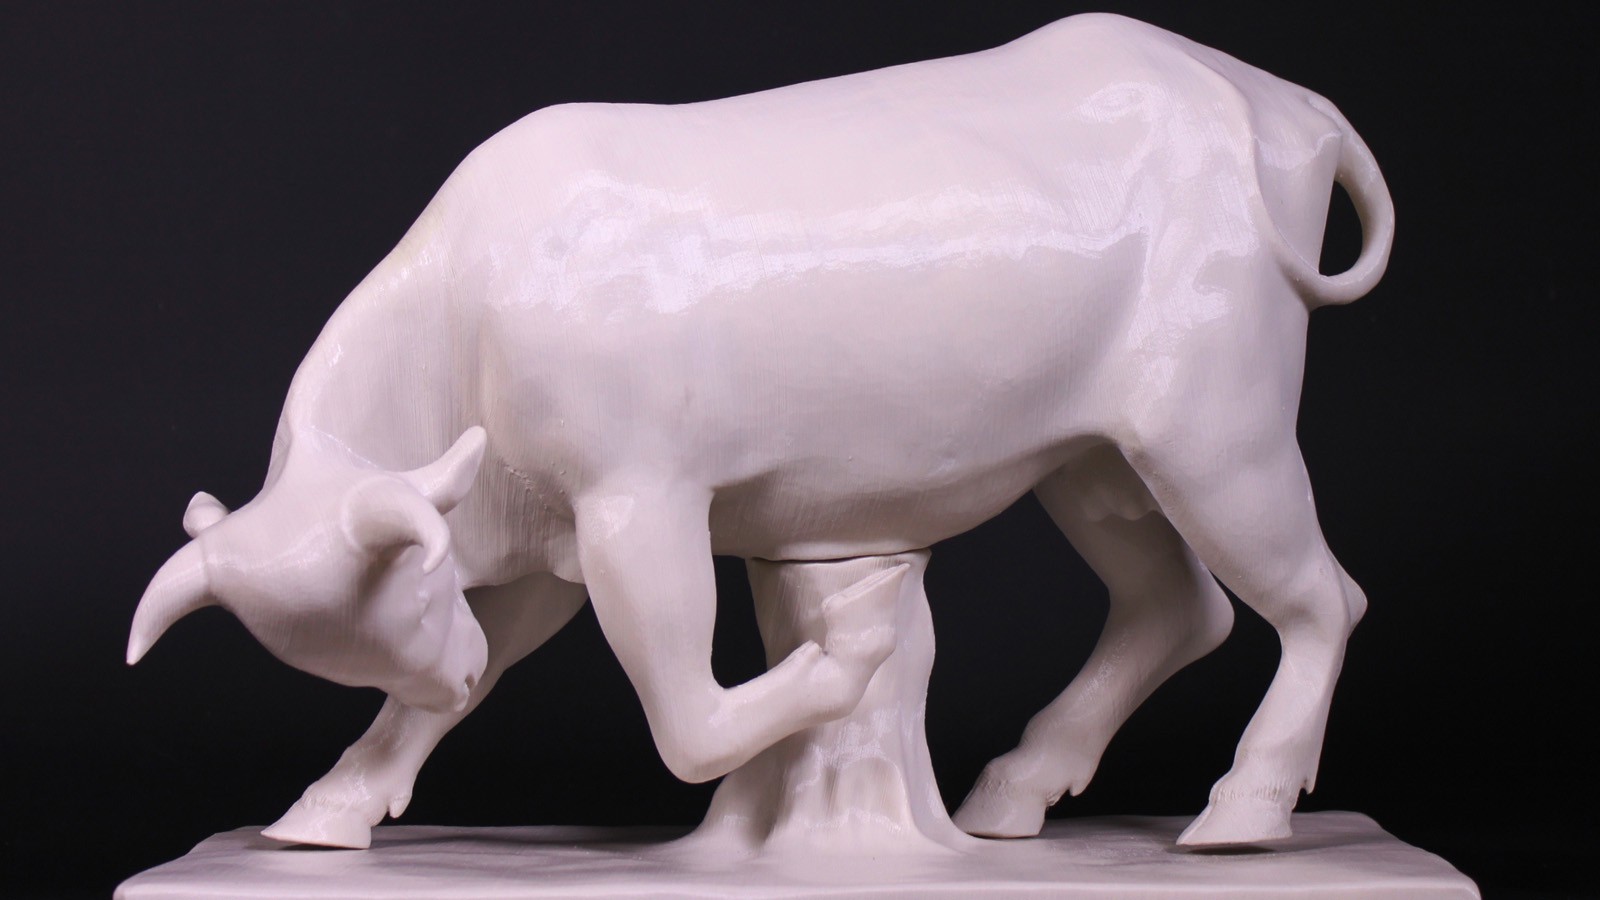 3D print of repaired Roman bull used as a tactile exhibit for visually impaired visitors